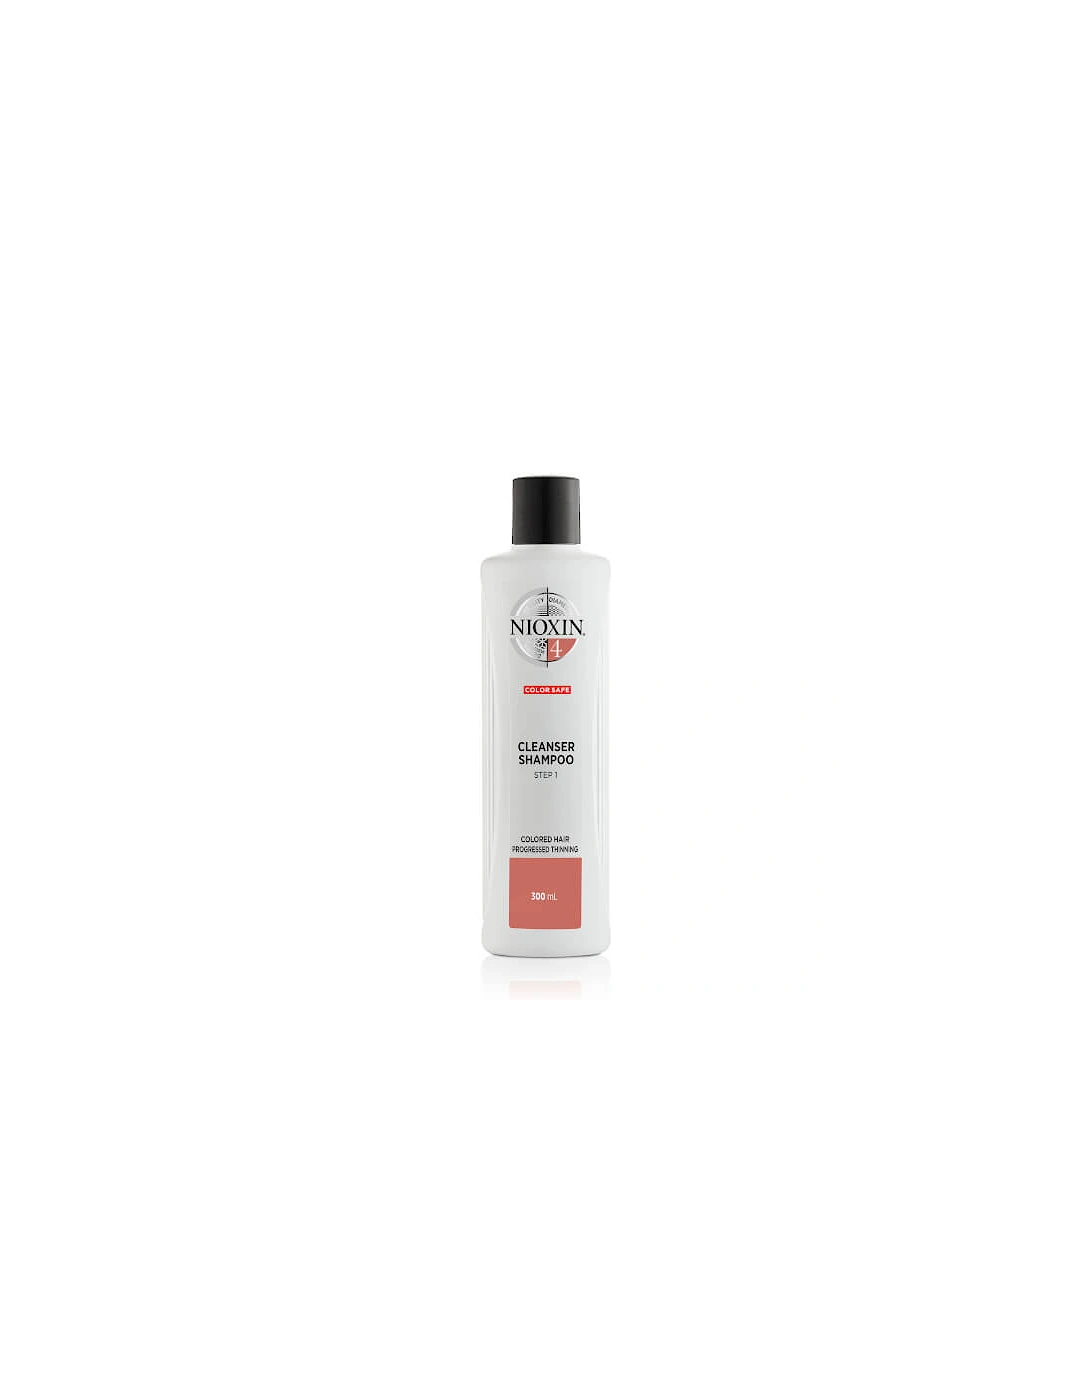 3-Part System 4 Cleanser Shampoo for Coloured Hair with Progressed Thinning 300ml - NIOXIN, 2 of 1